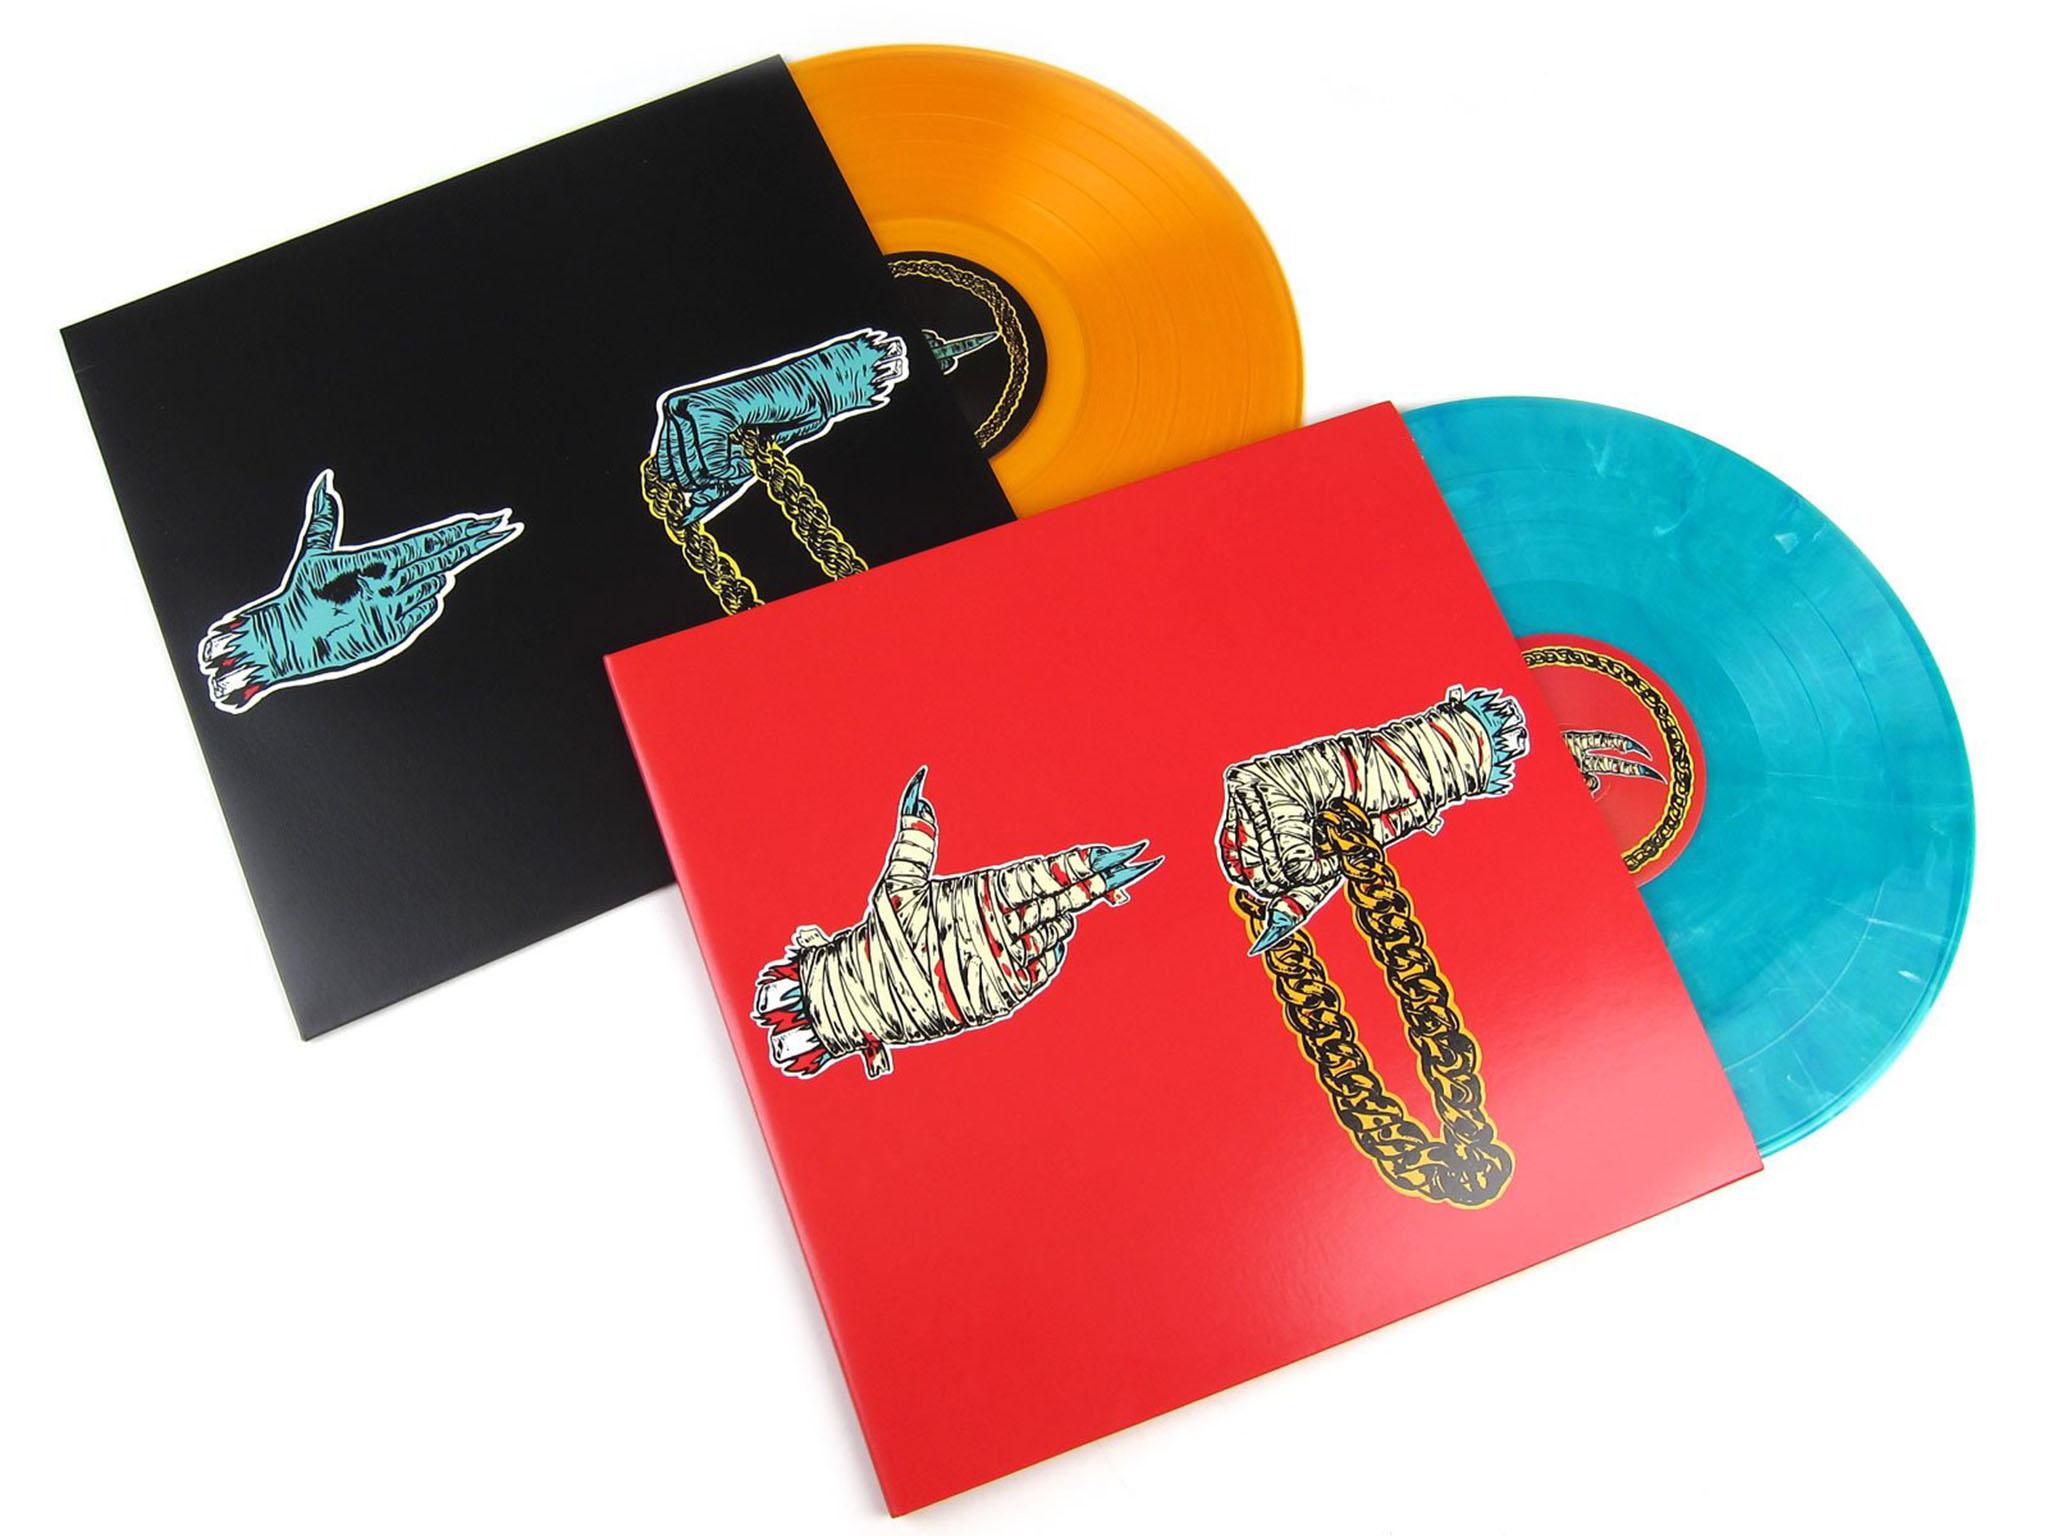 Artful: Run the Jewels produce music that sounds – and looks – great